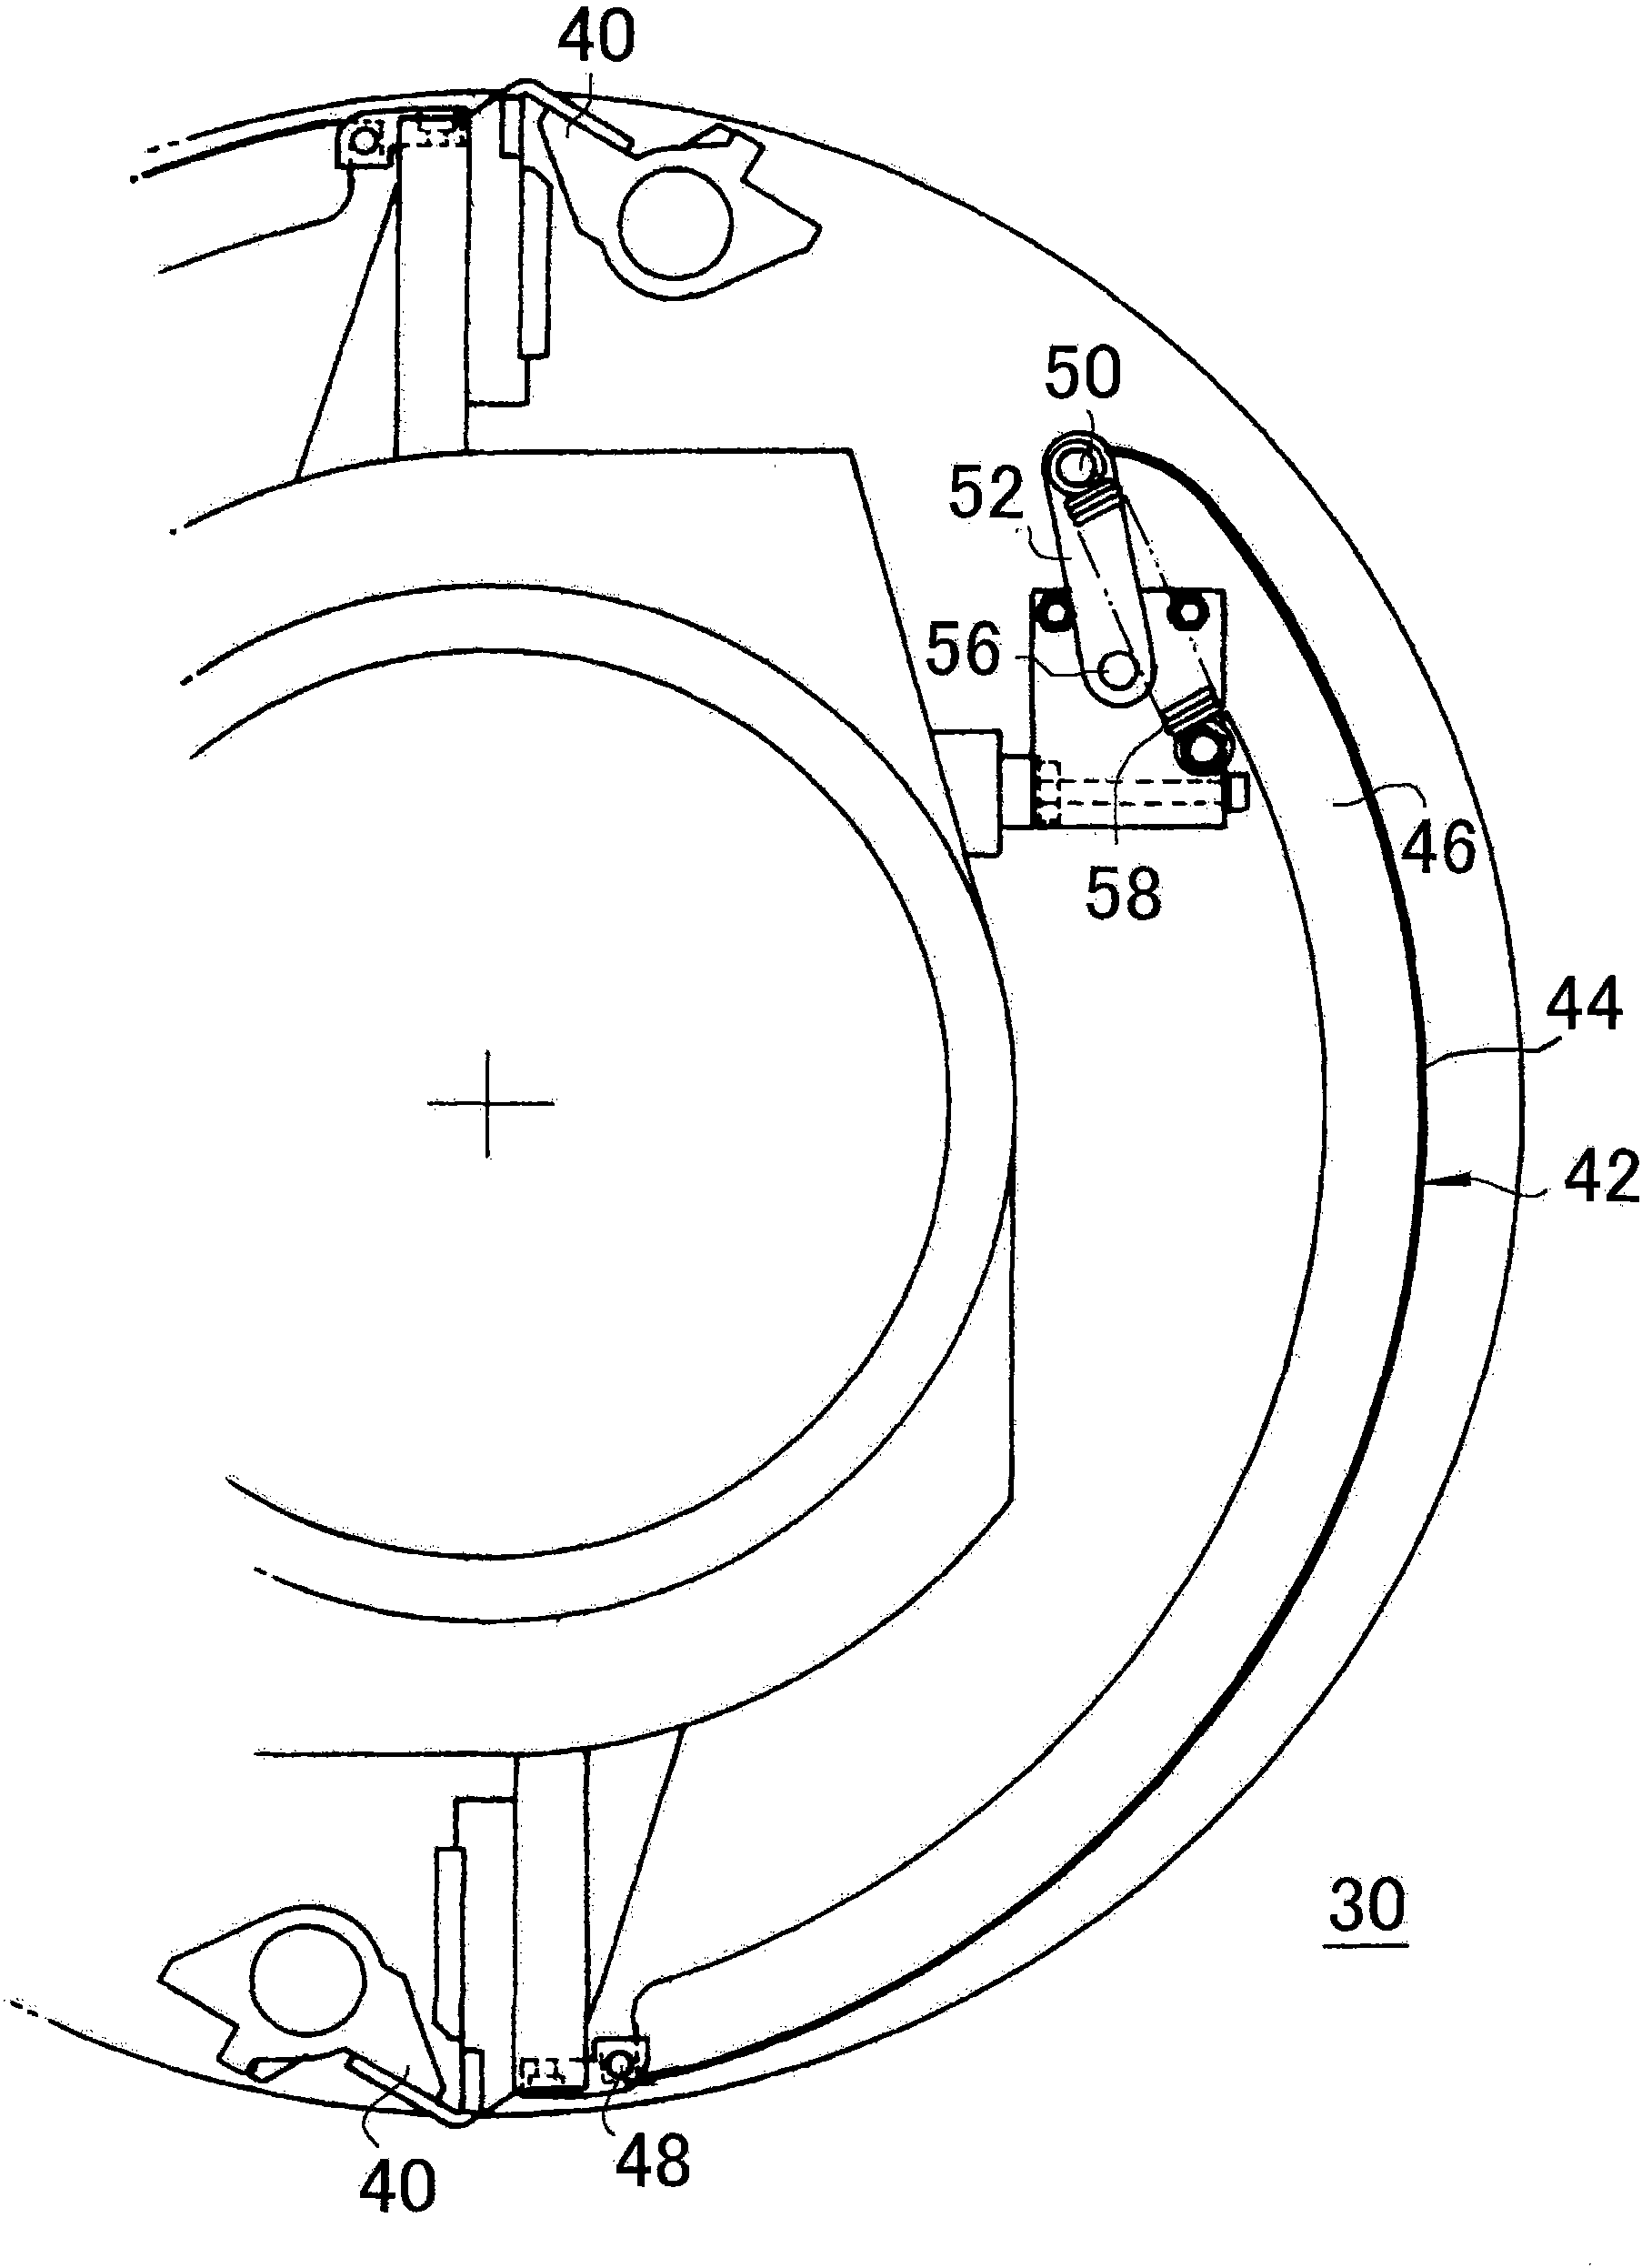 Apparatus for introducing sheet into sheet-fed printing press